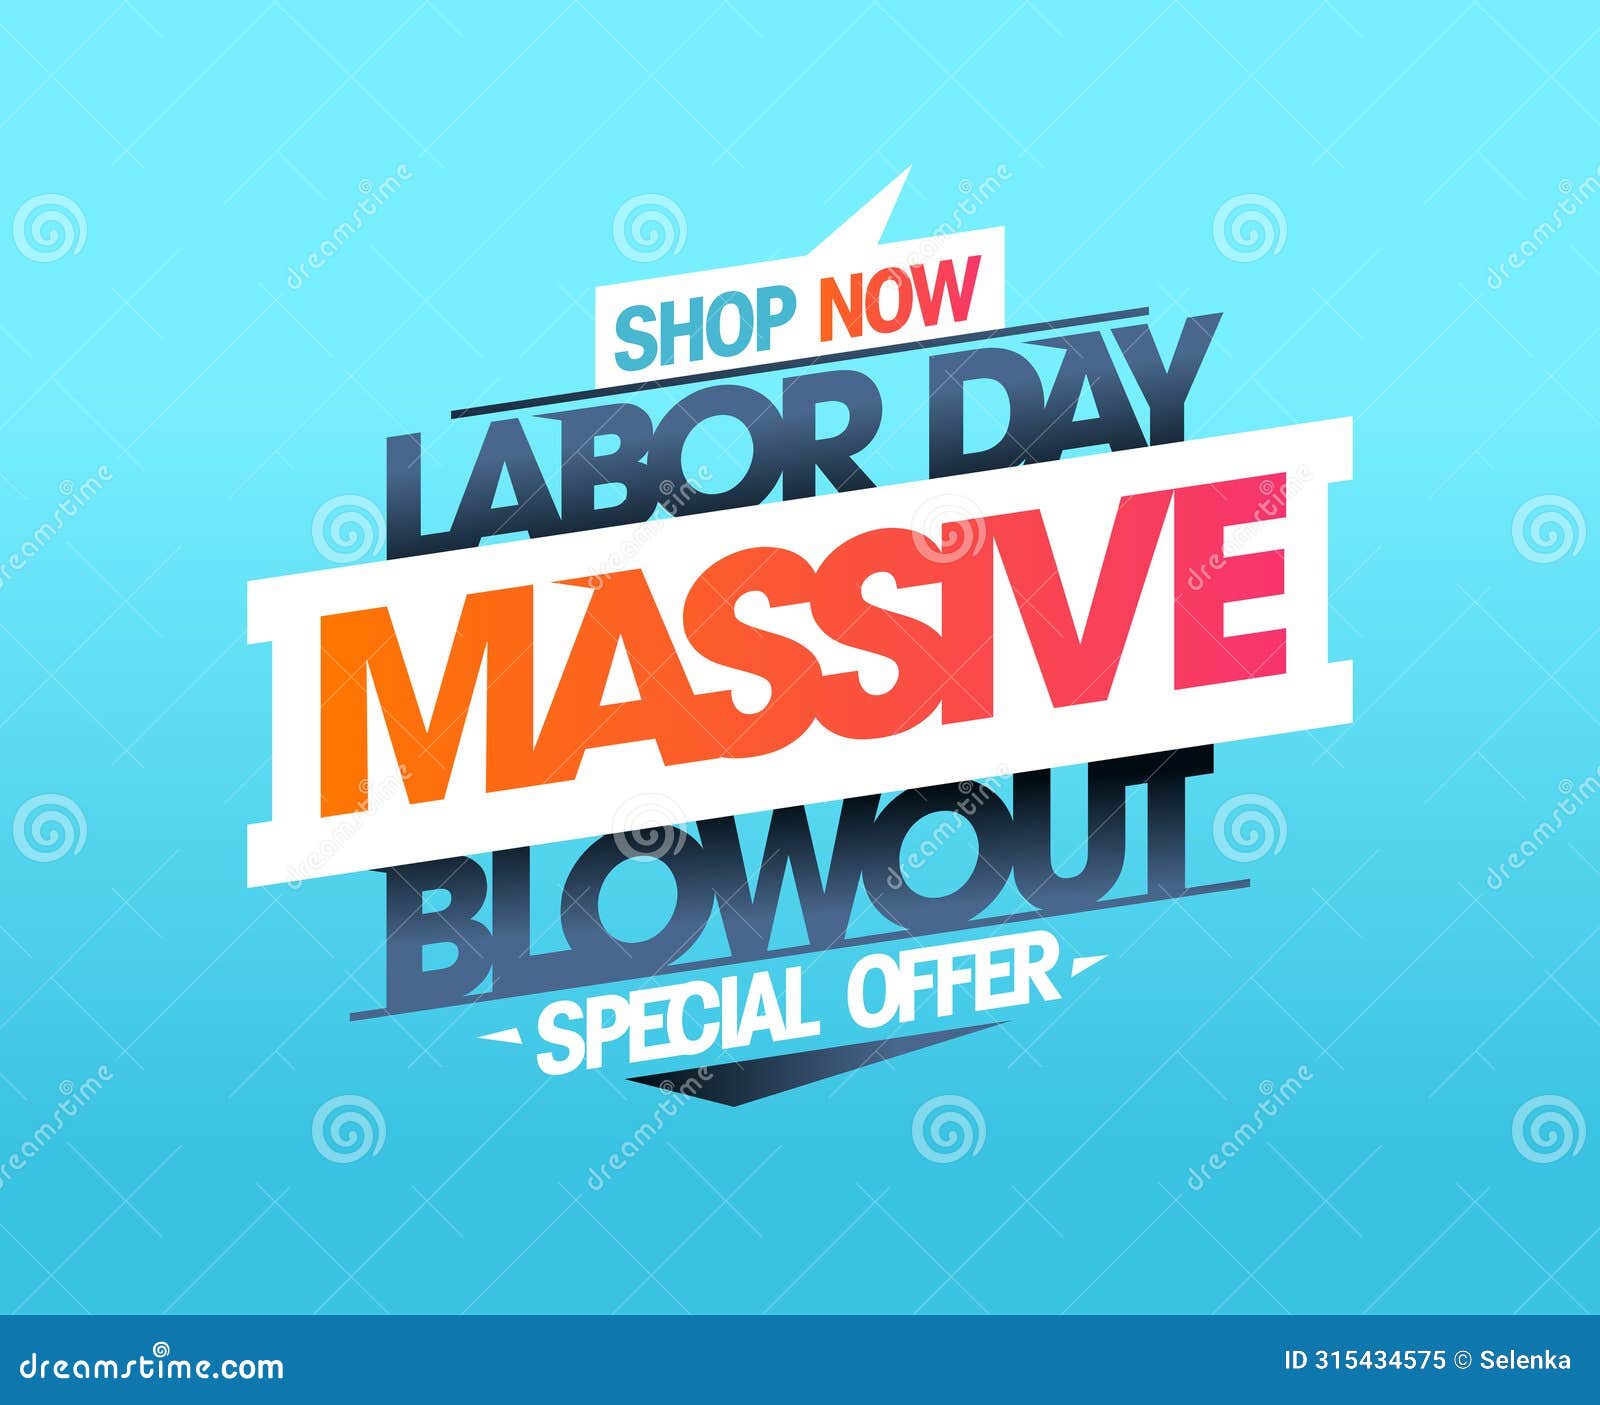 labor day massive blowout offer banner mockup